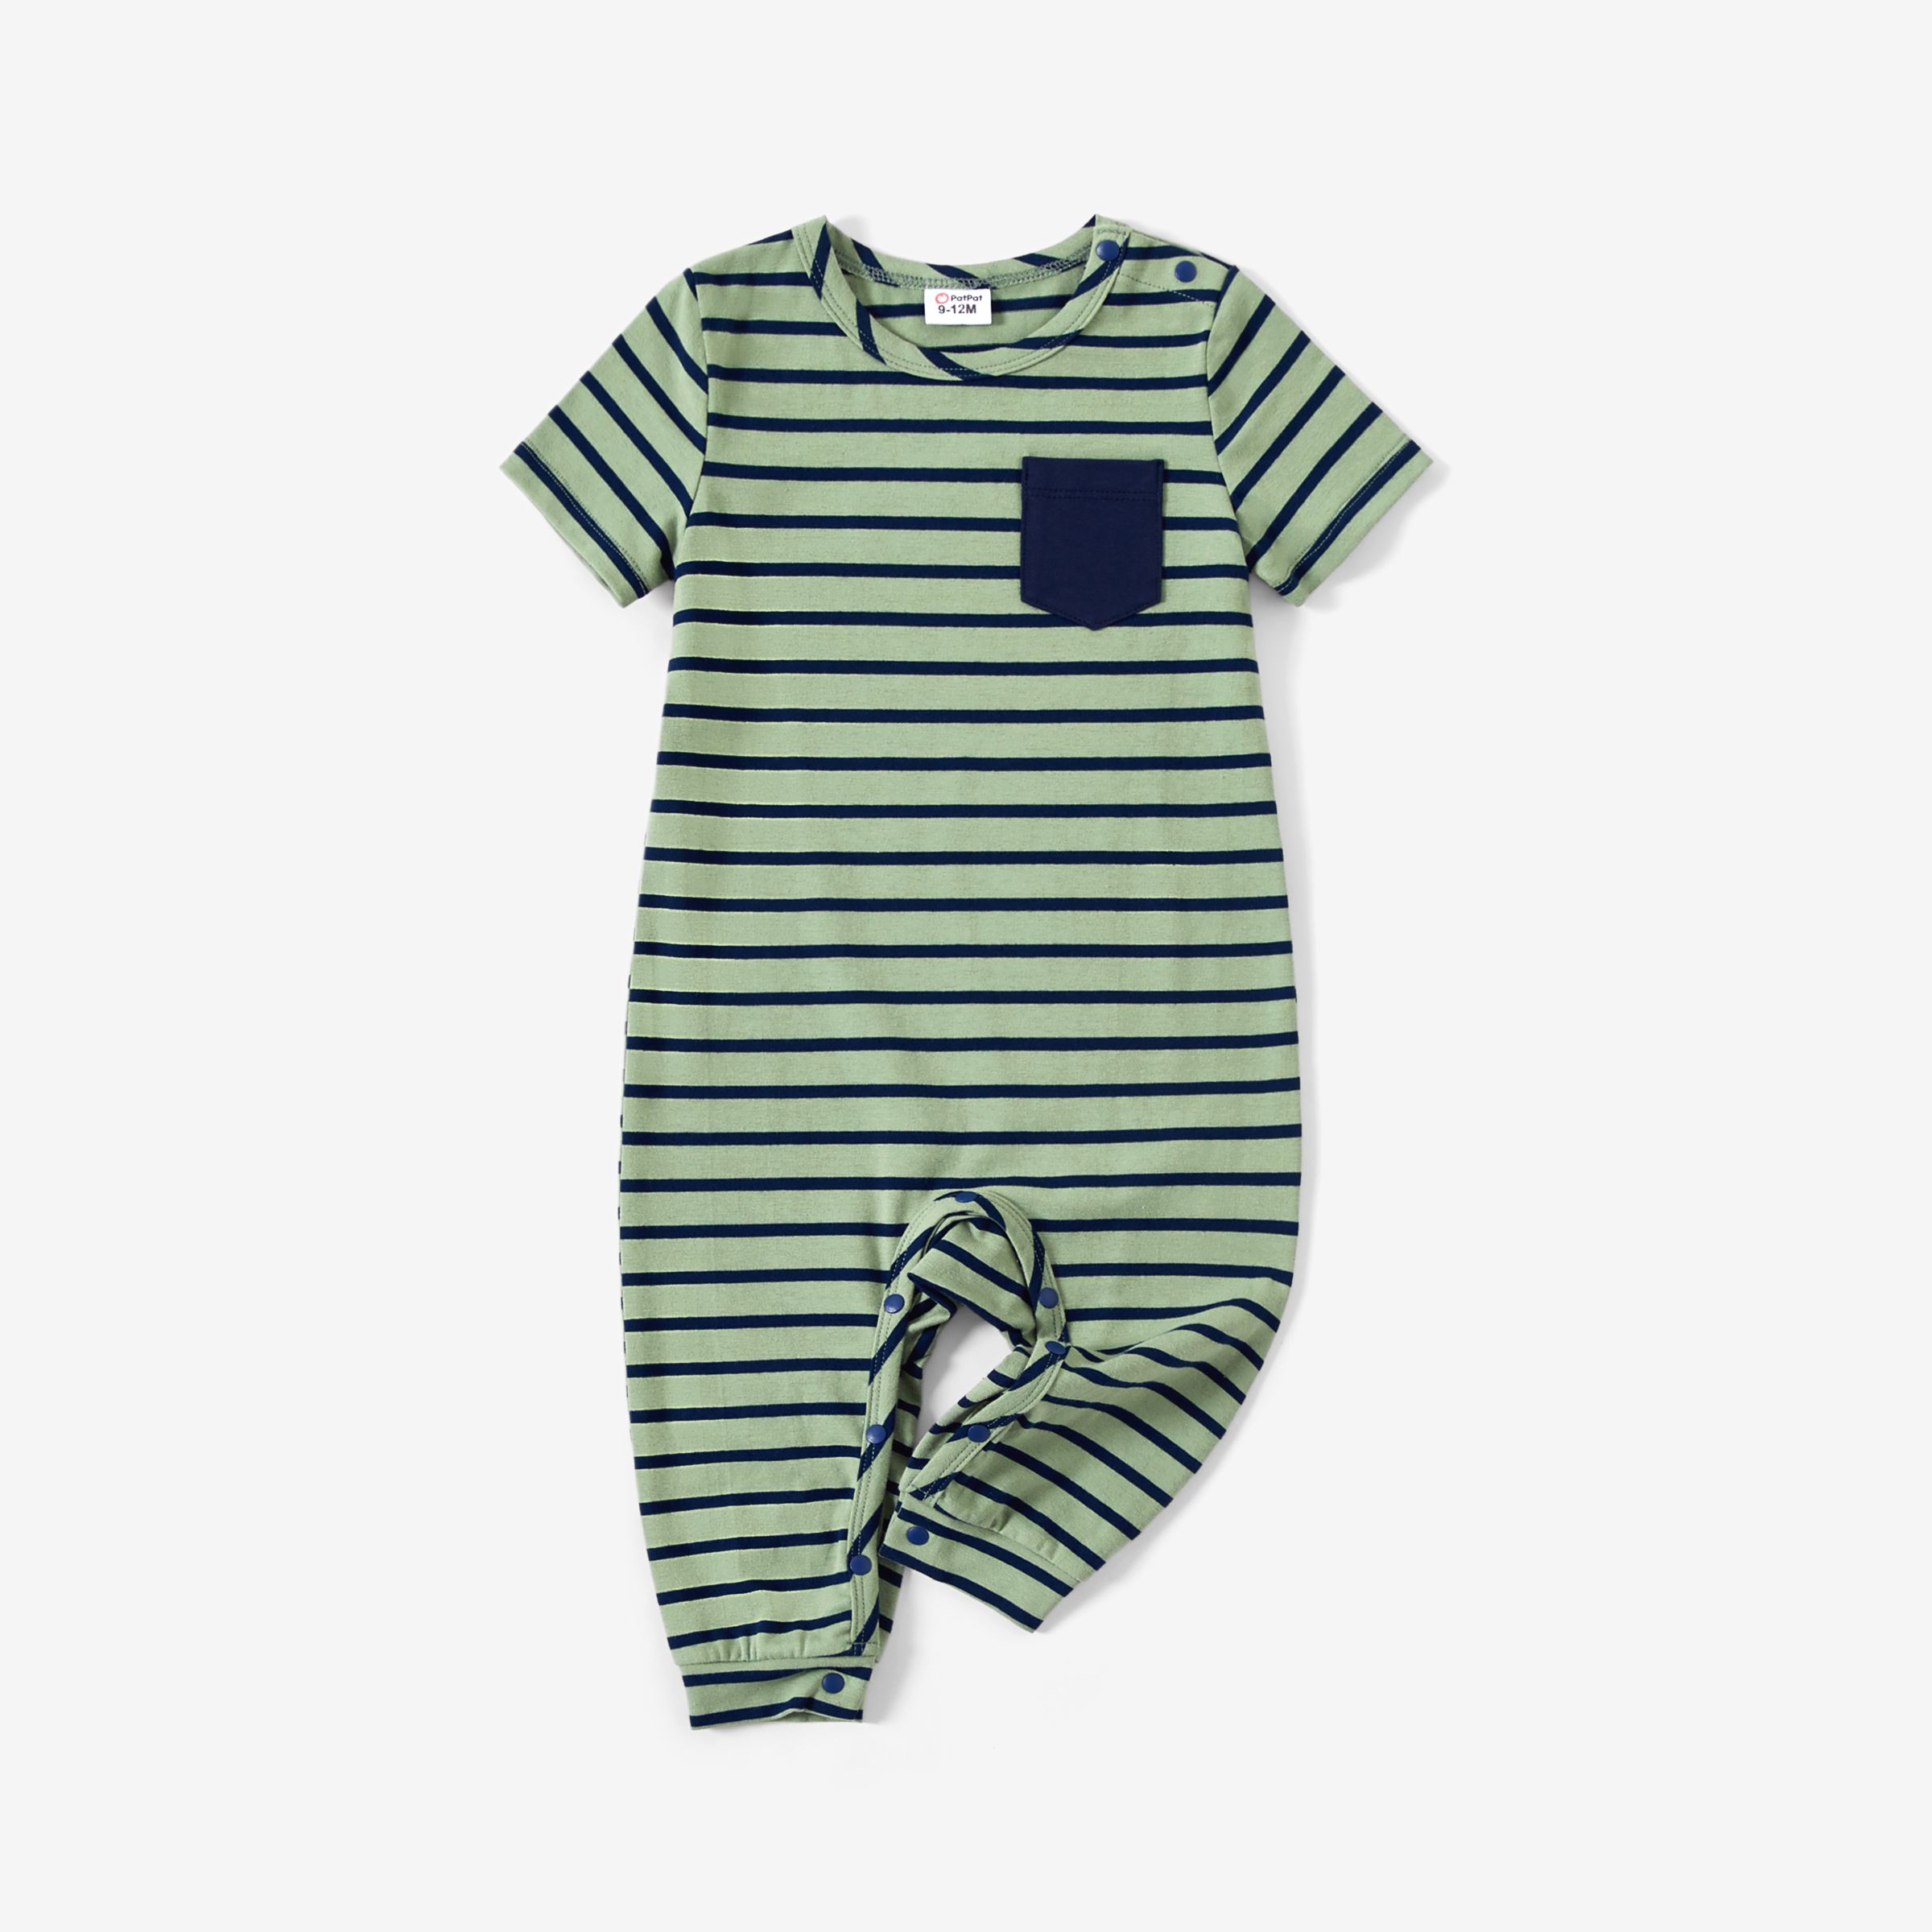 Family Matching Stripe Colorblock Tee And H-Line Side-Tie Dress Sets